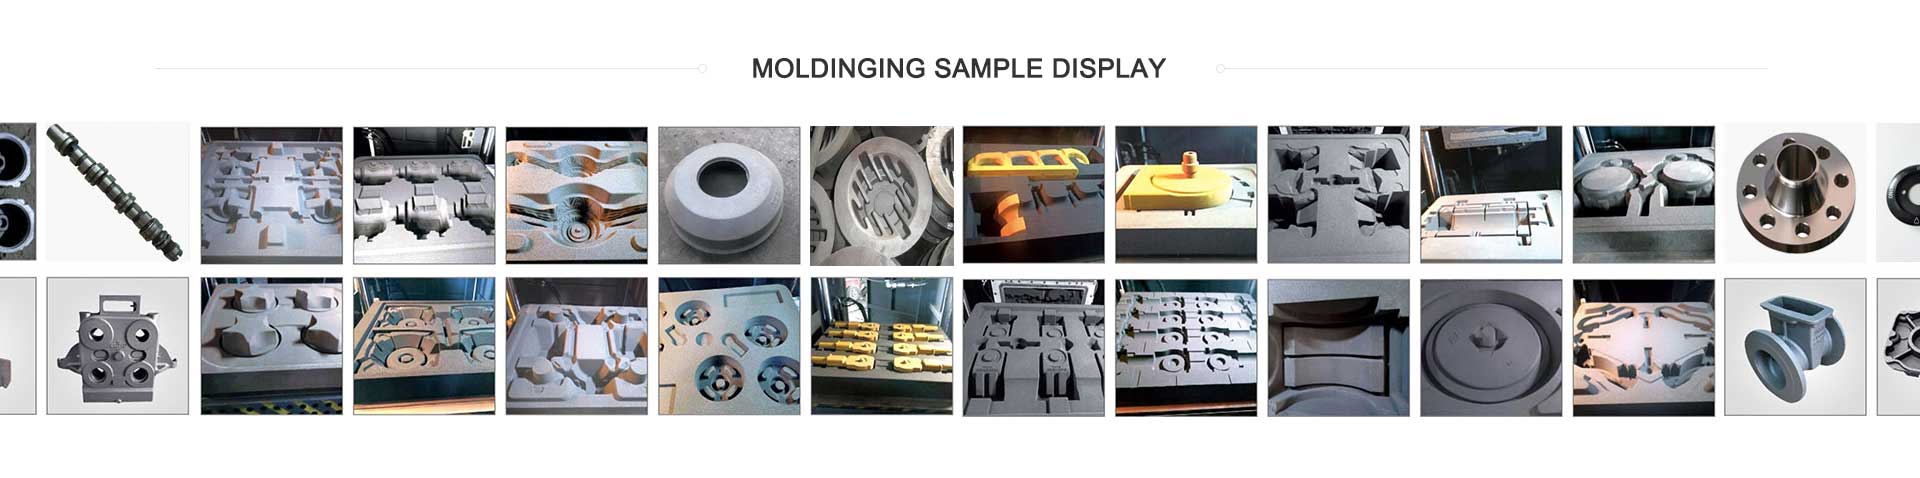 automatic casting molding machines,Automatic molding machine for foundry